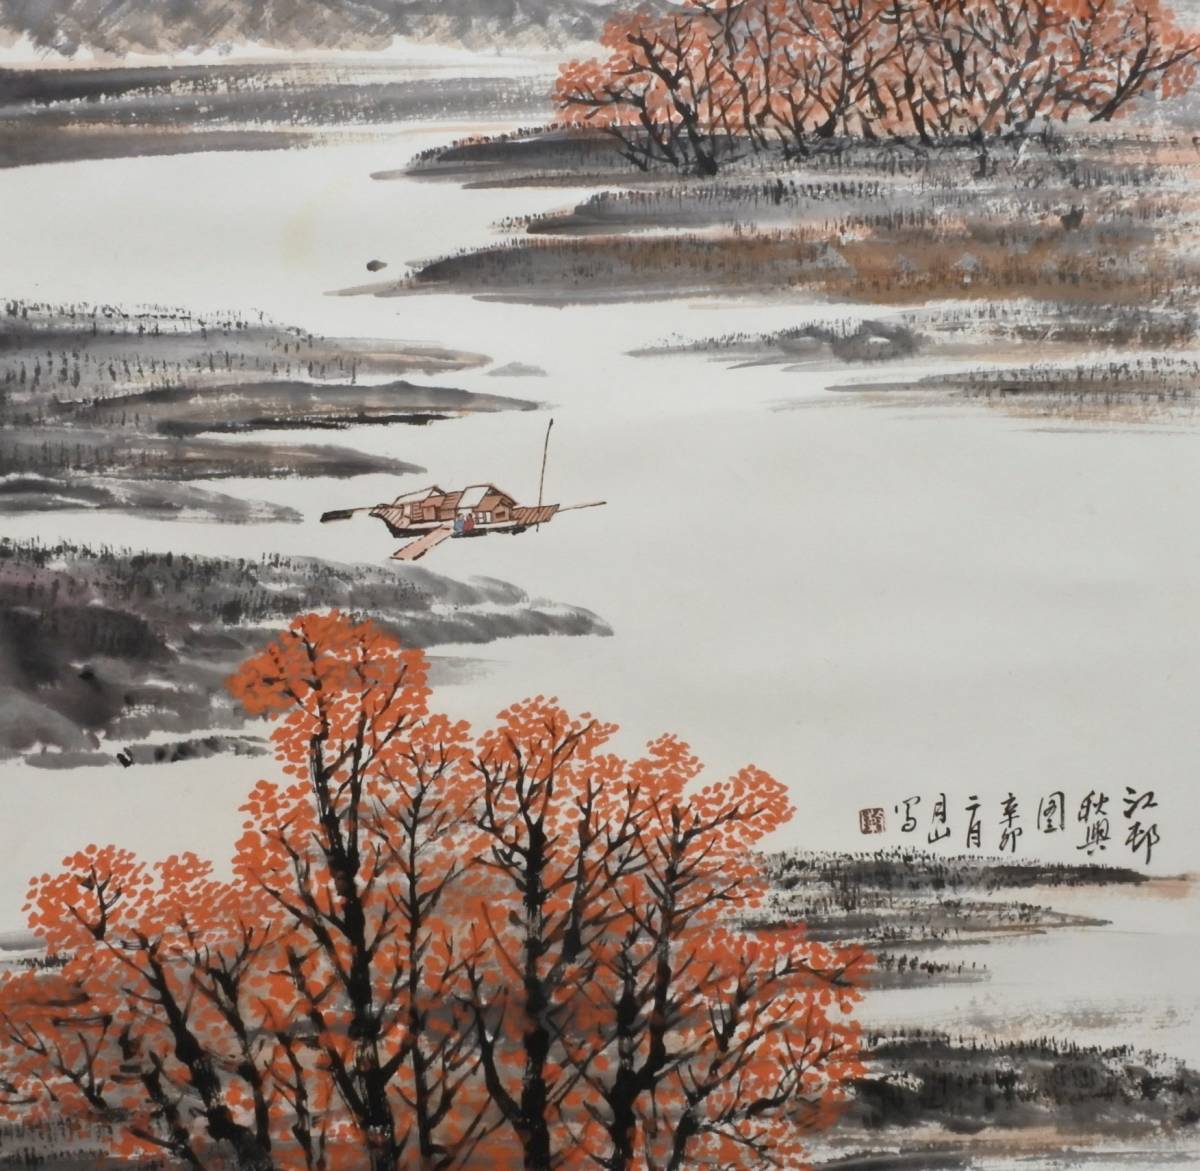 ☆Acquired 10 years ago, Chinese first-class painter Chen Yueshan (Chingetsusan) [Landscape] Hand-painted genuine work, painting only, stored item, can be shipped together, shipping fee is 1500 yen, Artwork, Painting, Ink painting